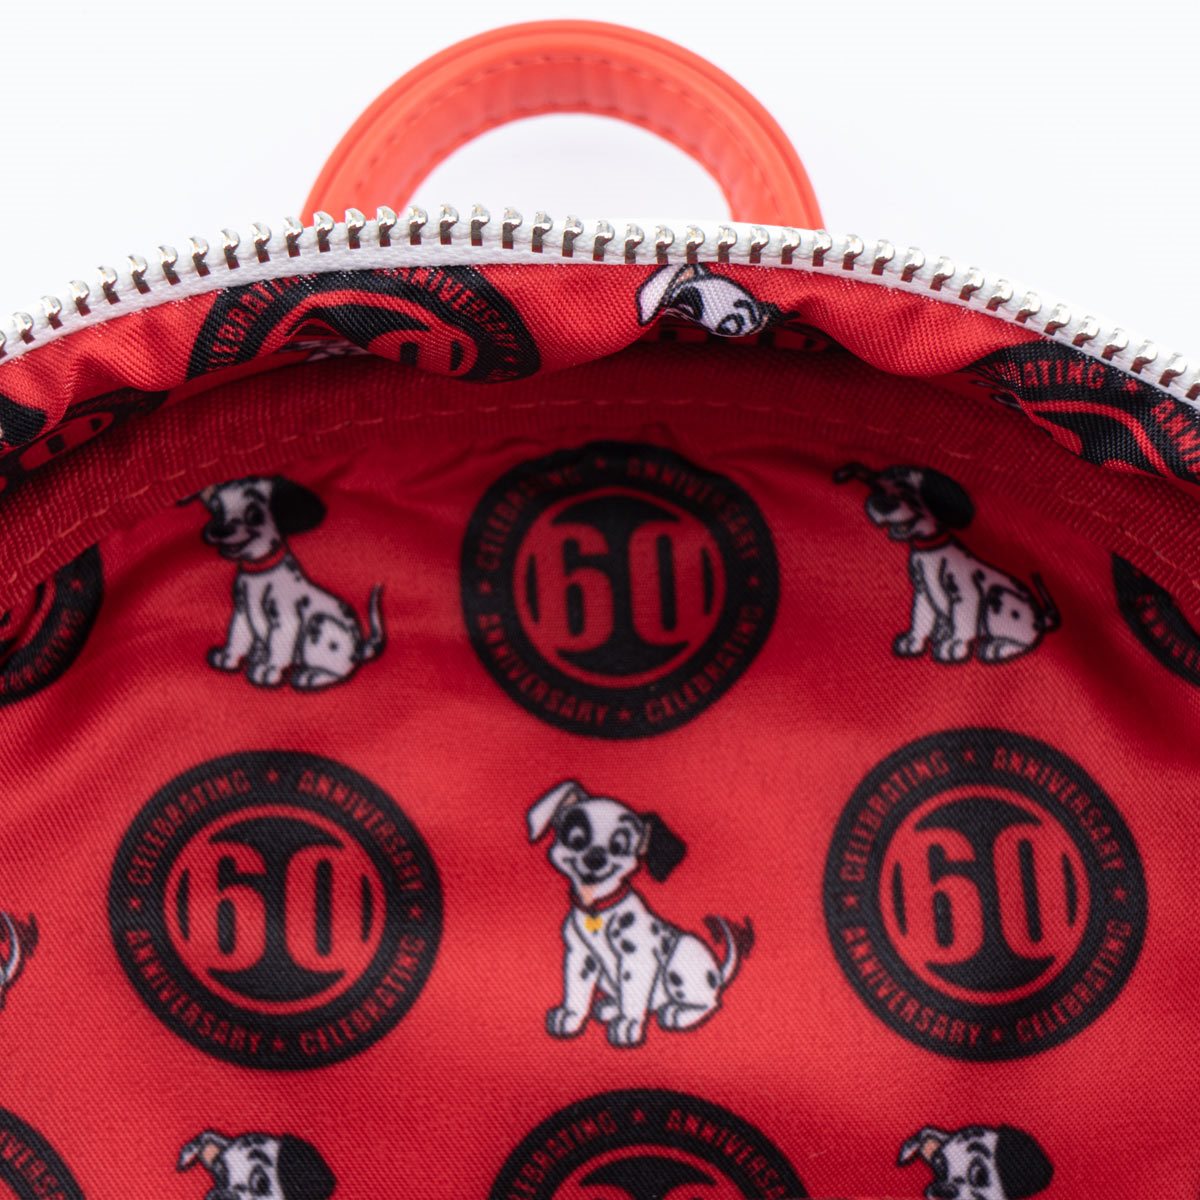 101 DALMATIANS 60TH ANNIVERSARY PATCH COSPLAY LOUNGEFLY MINI BACKPACK